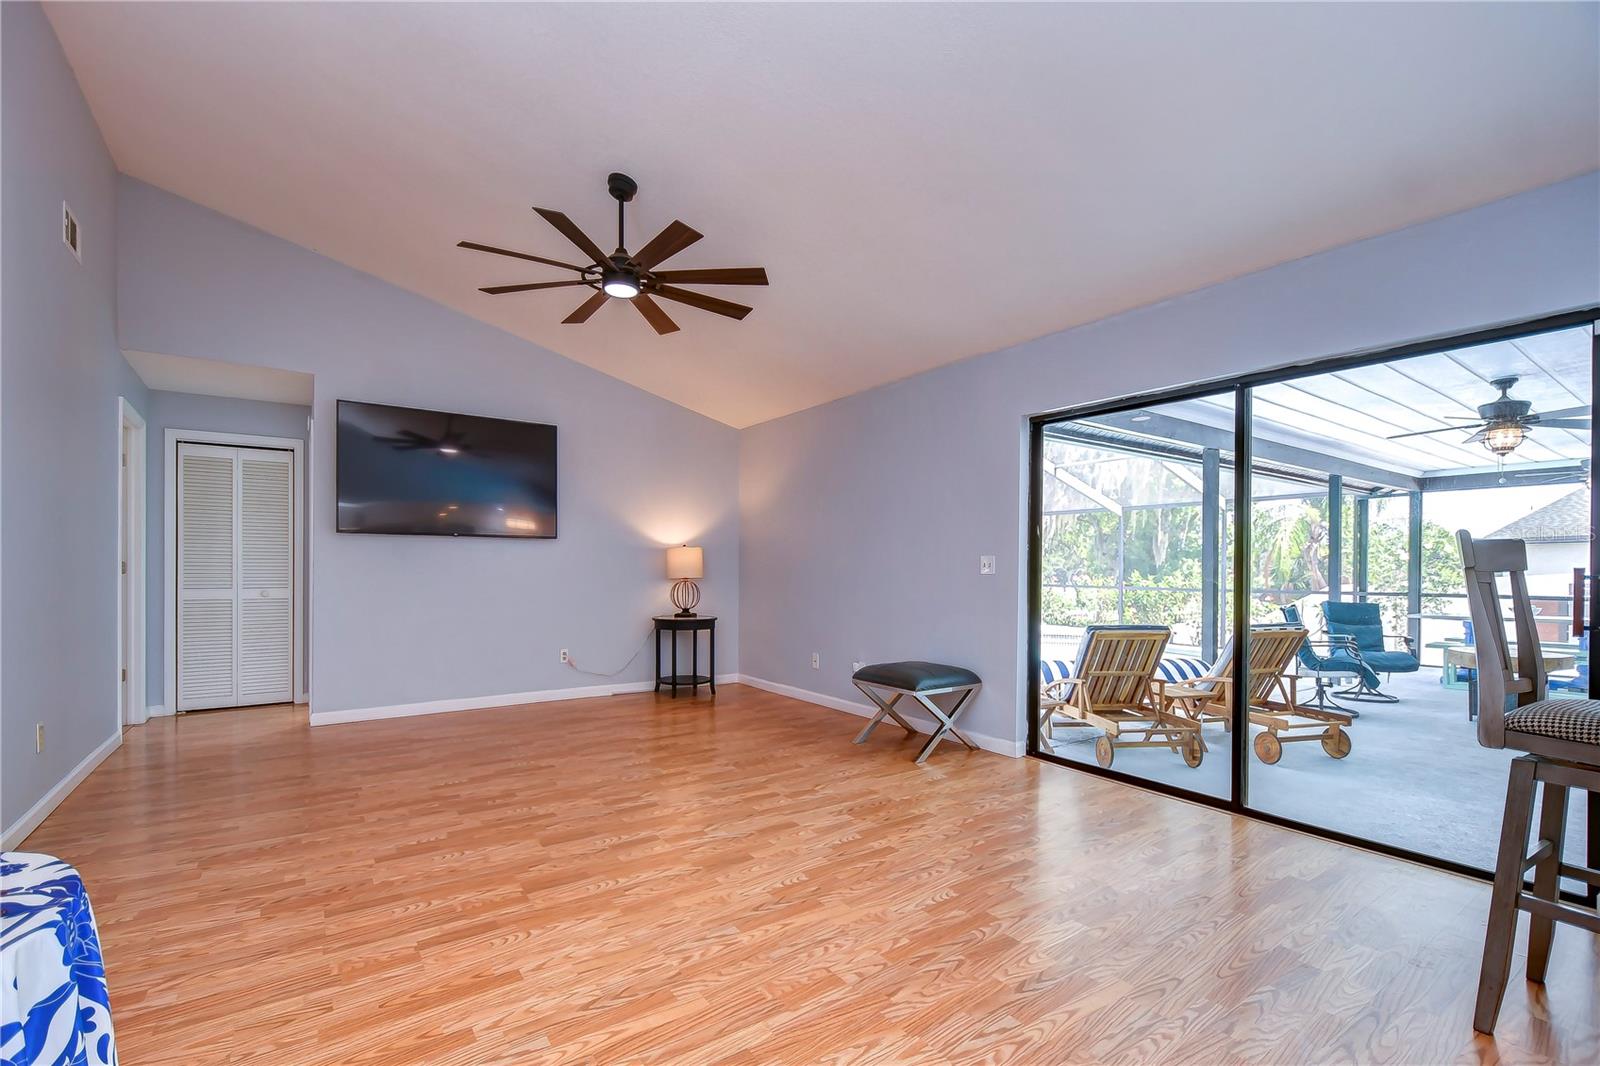 Family room features unrivaled lanai views!